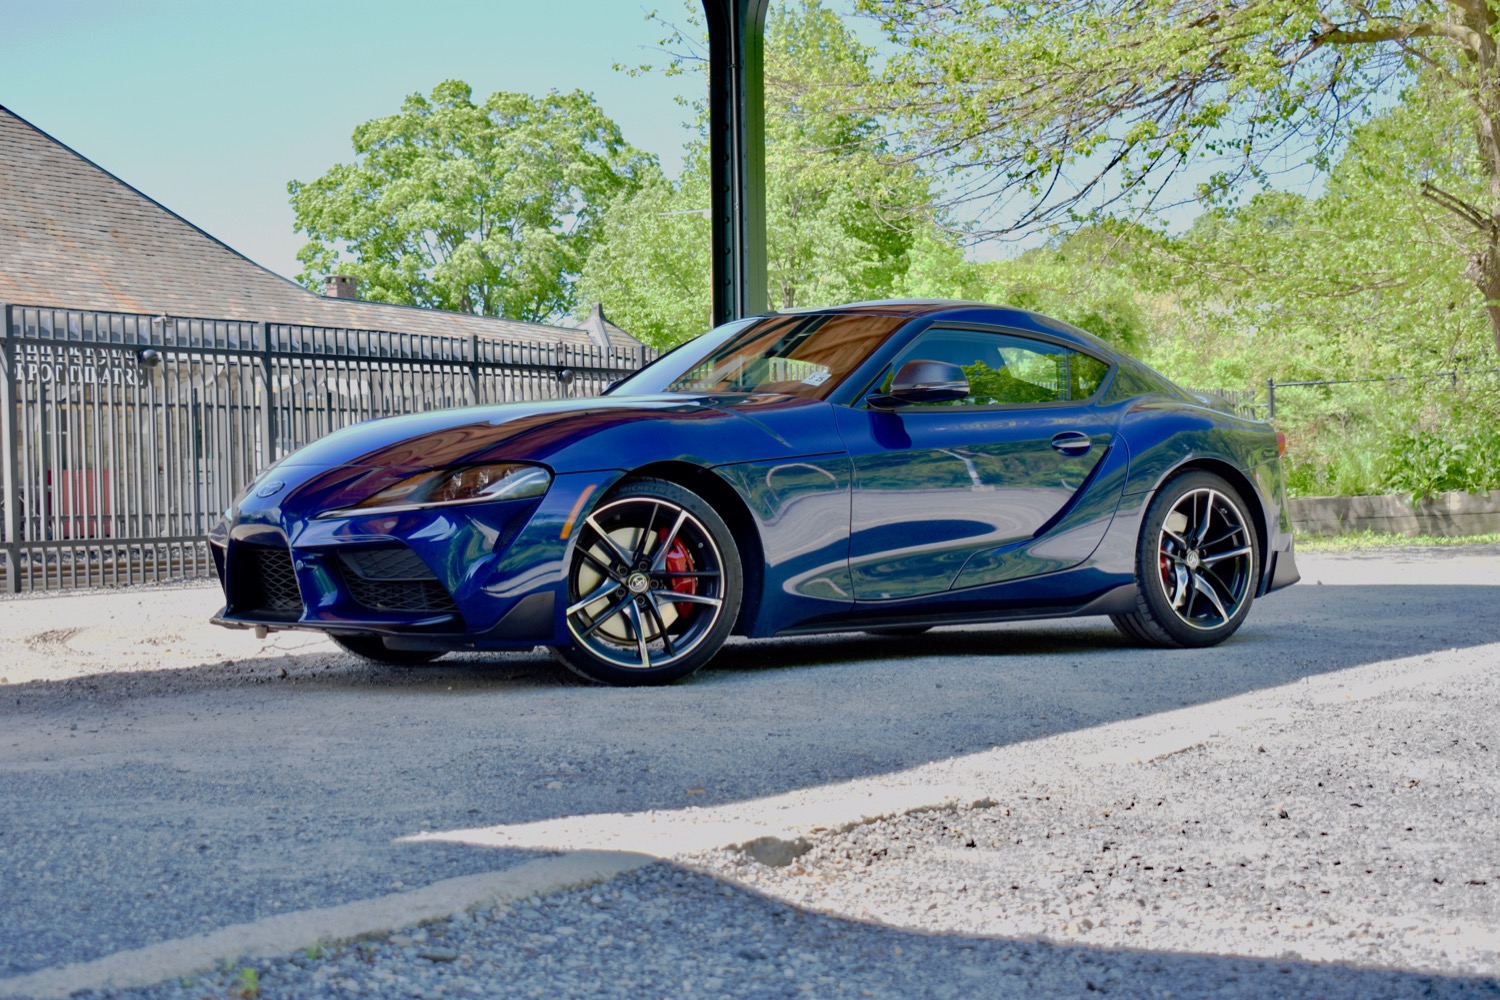 Toyota Supra Too Pricey for You? Buy a Subaru BRZ Instead